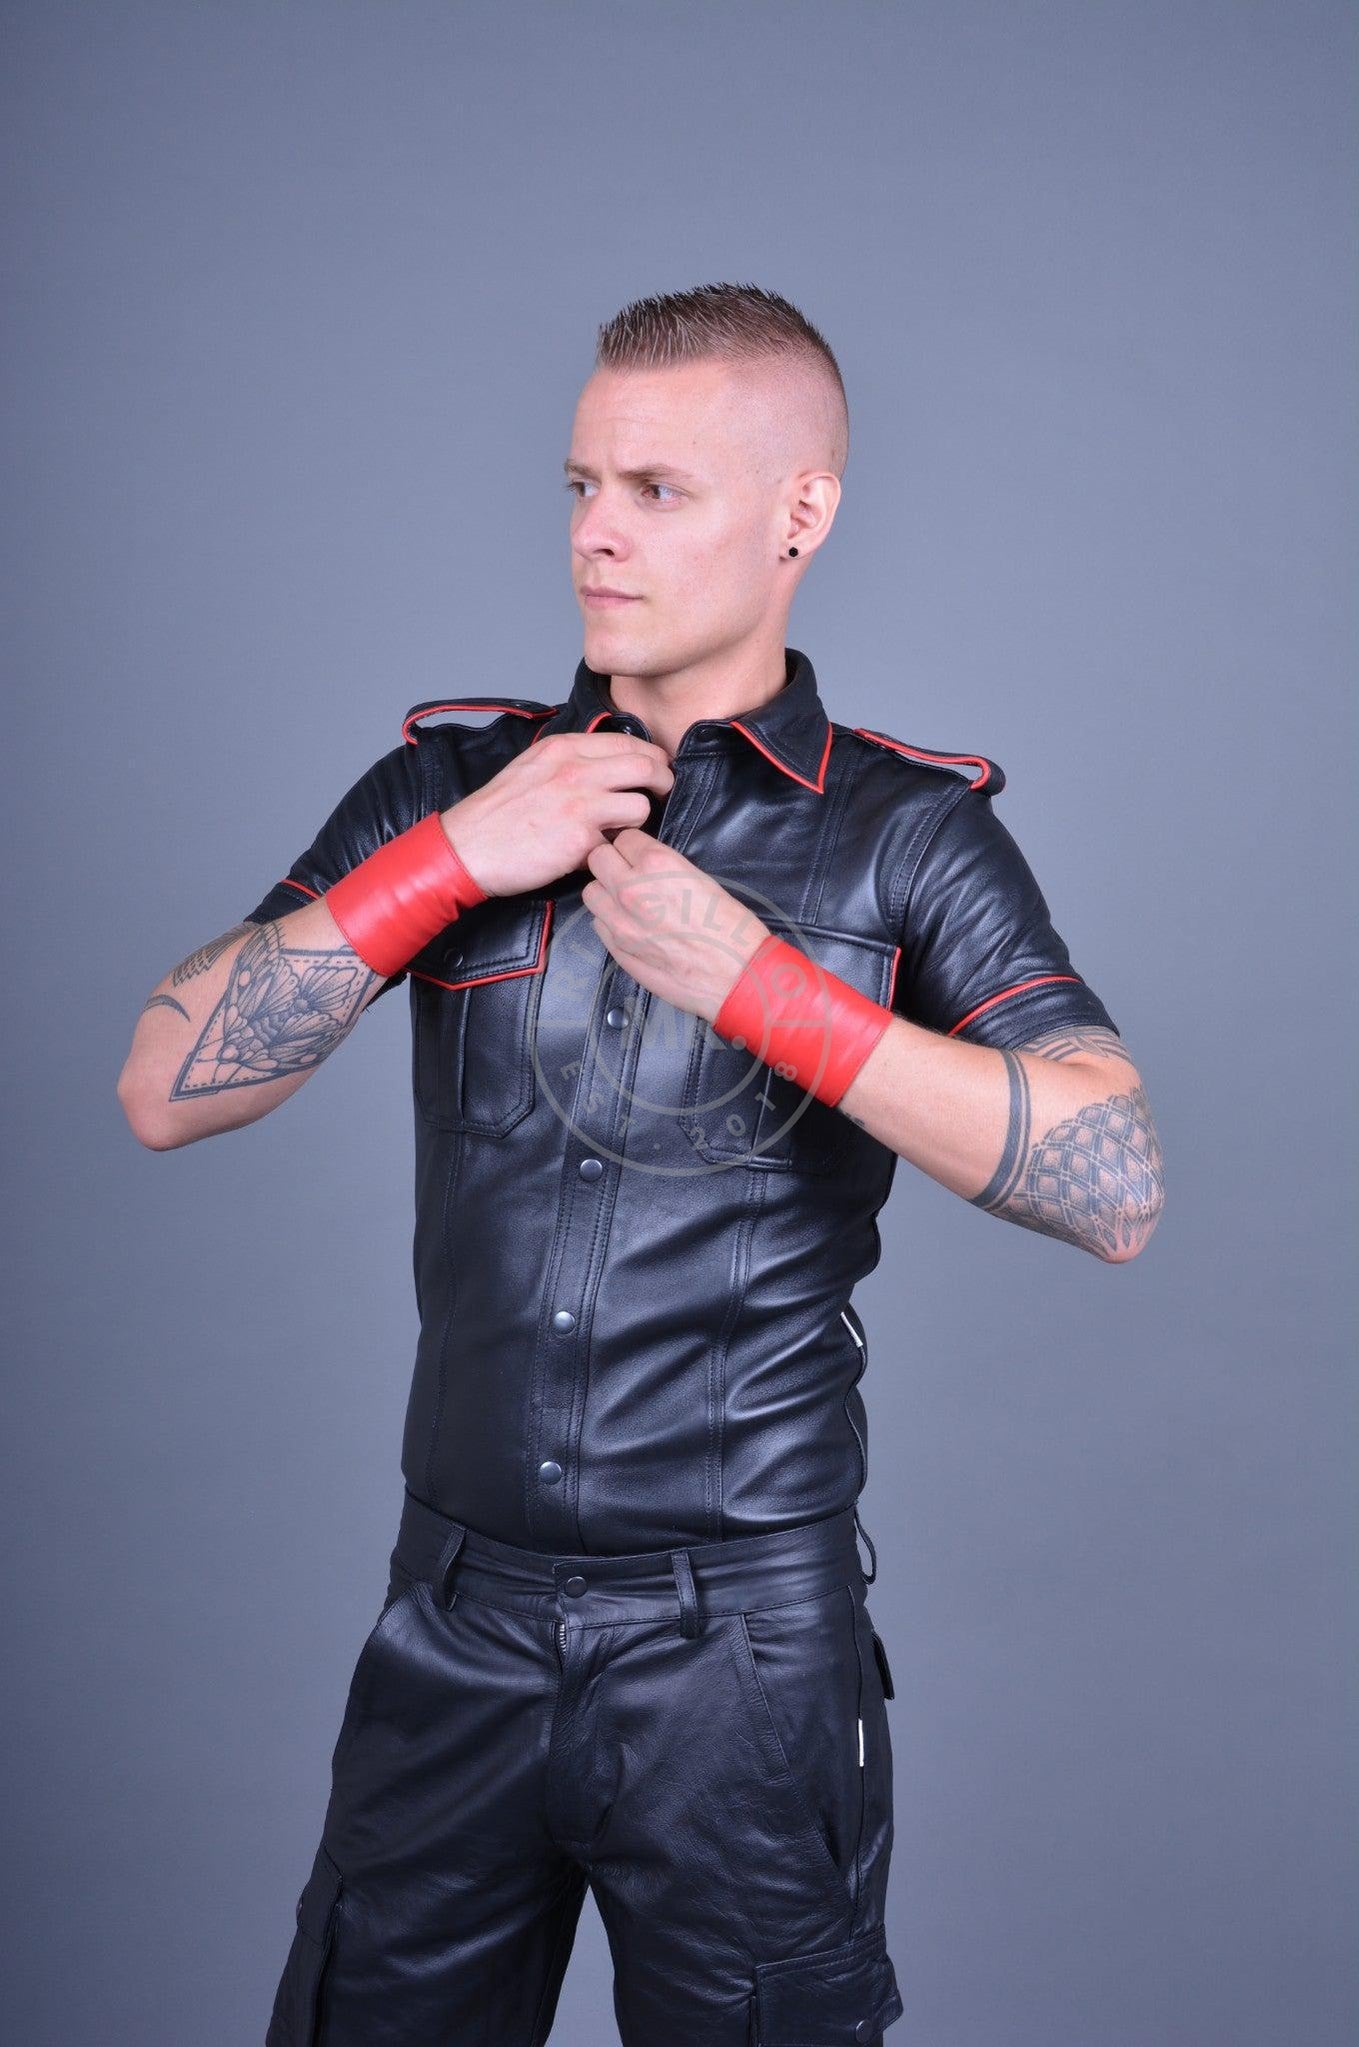 Black Leather Shirt - RED Piping at MR. Riegillio